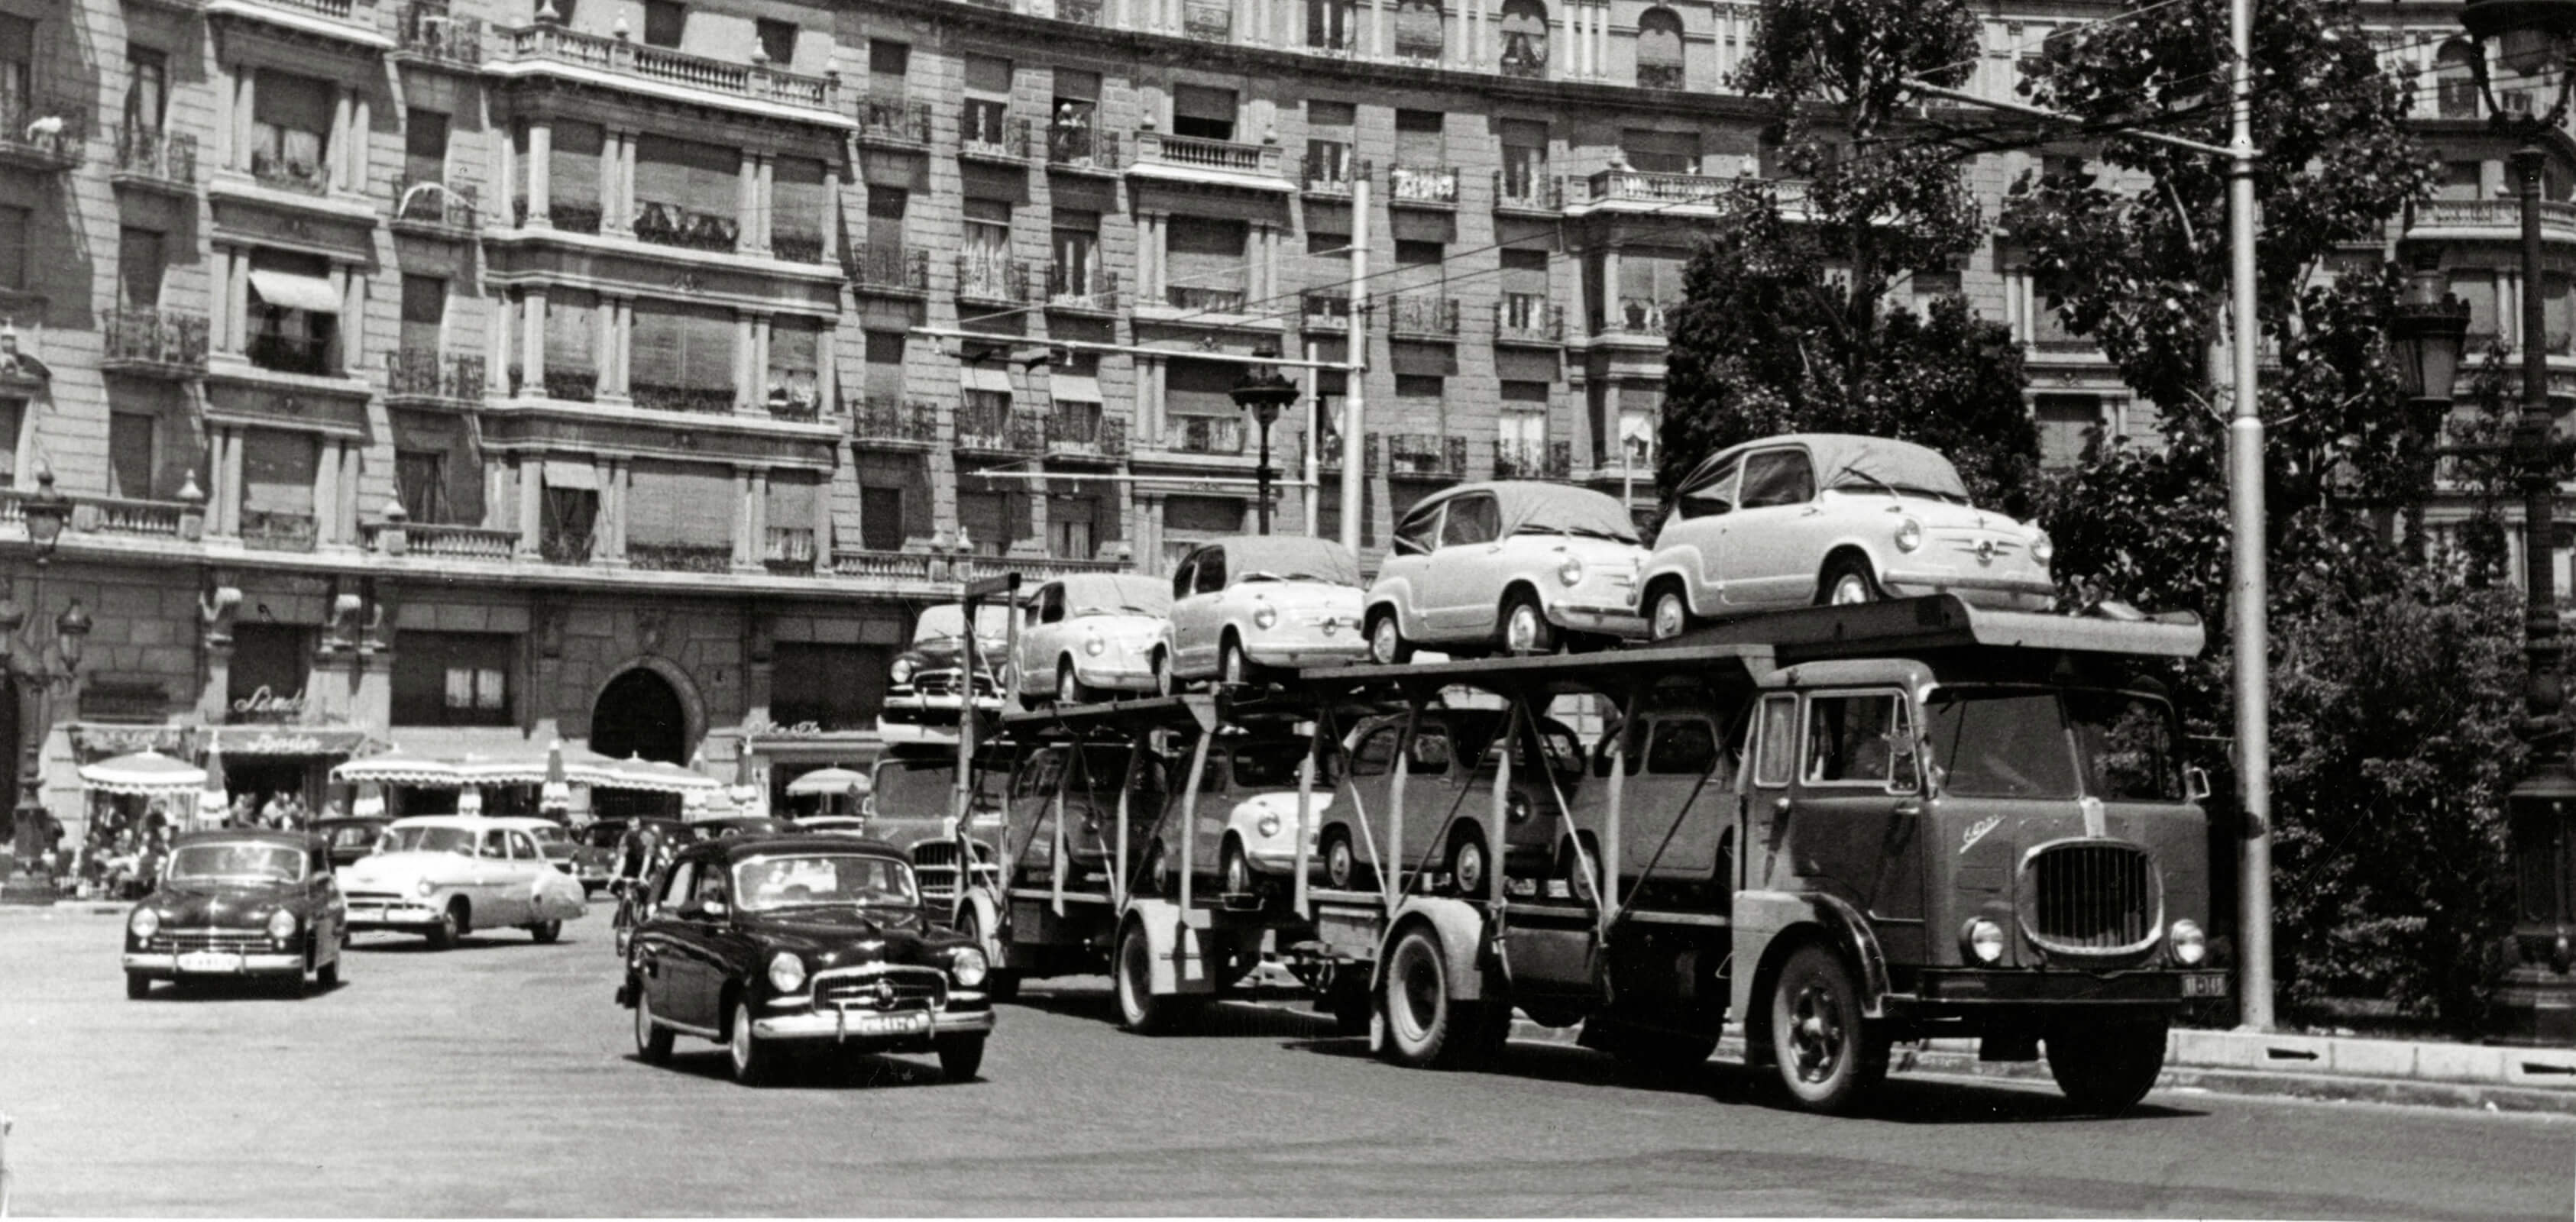 SEAT brand history 1950s - SEAT 600 on a truck